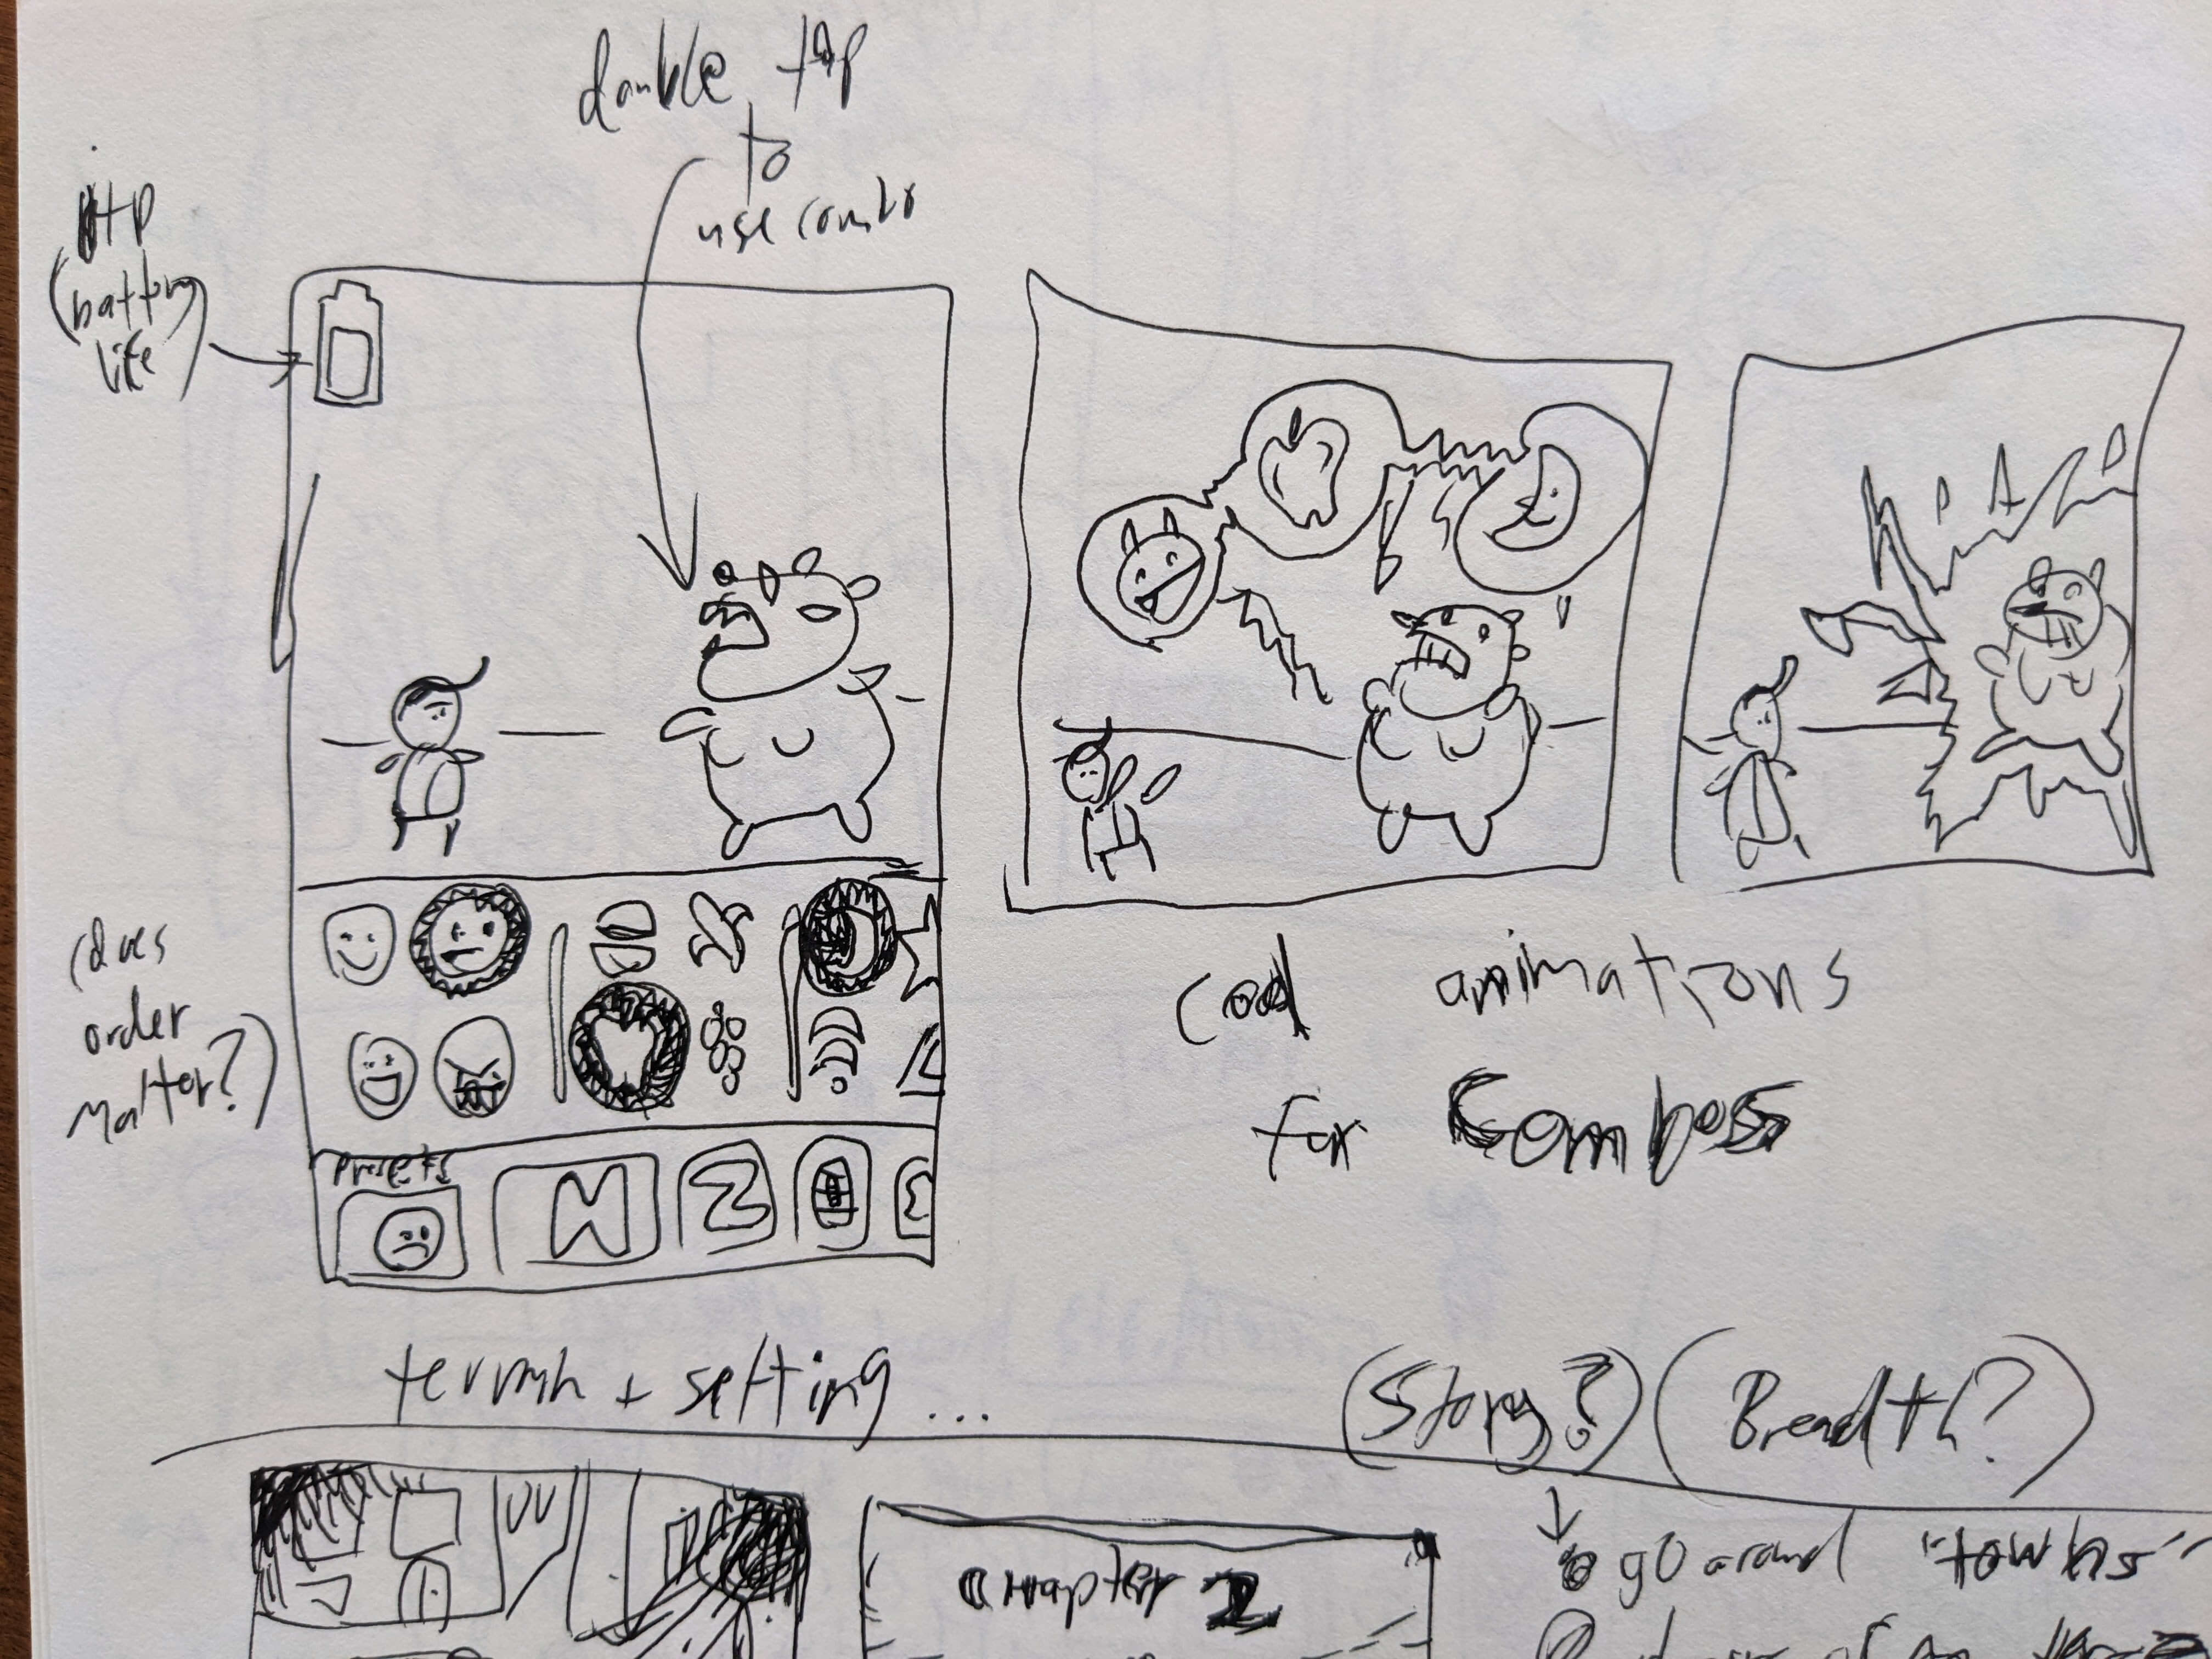 Initial sketches of the game idea